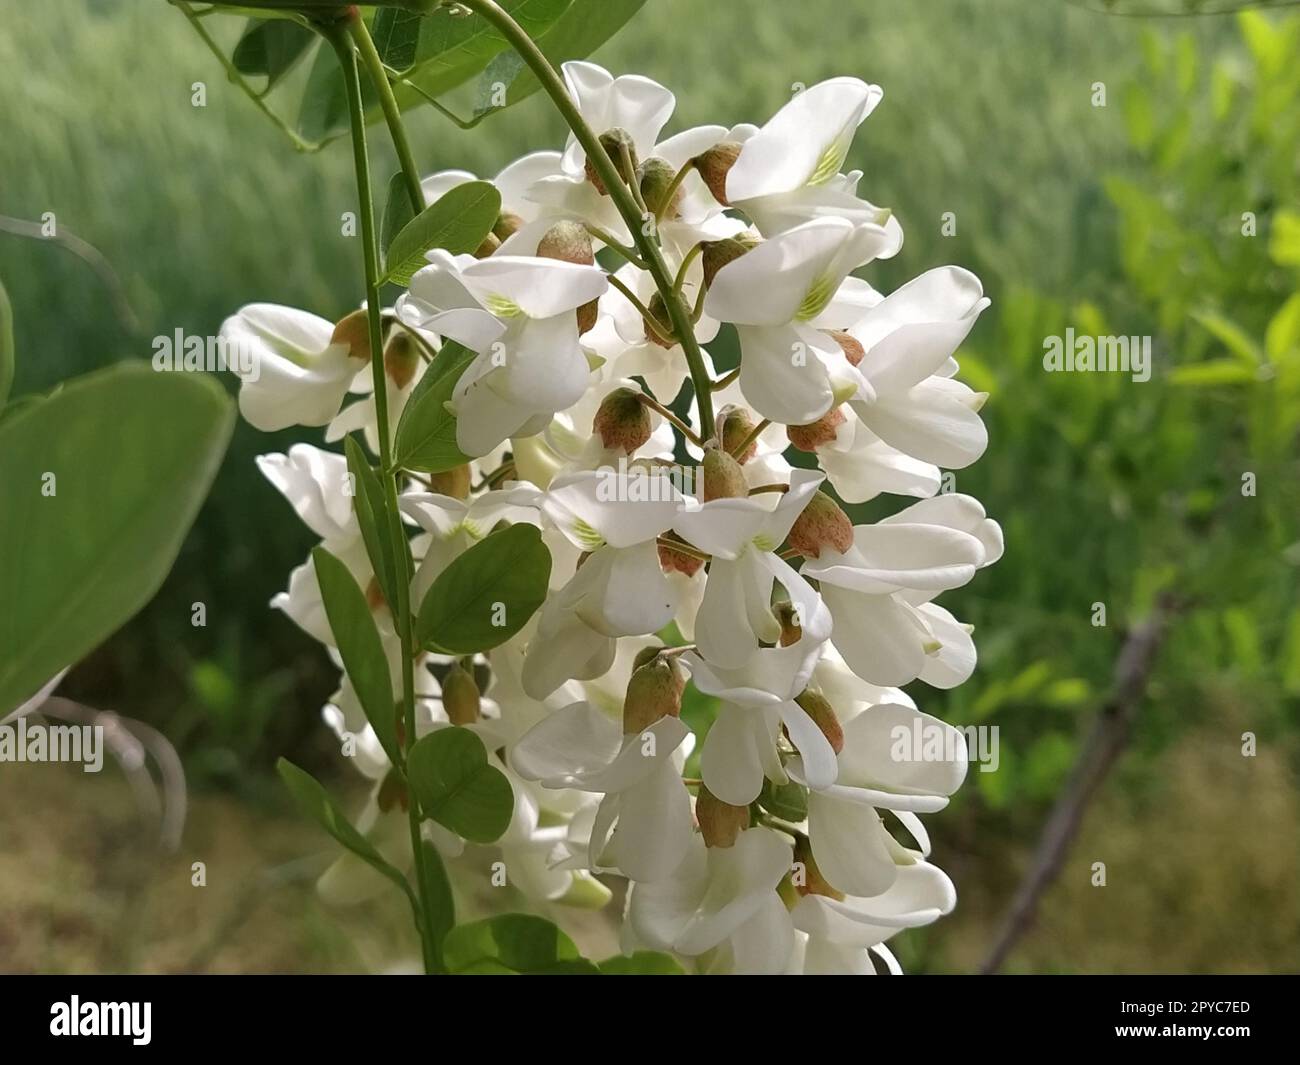 Flowers of White Acacia. Robinia pseudoacacia, commonly known in its native territory as black locust. White fragrant flowers like a good honey plant. Close up Stock Photo